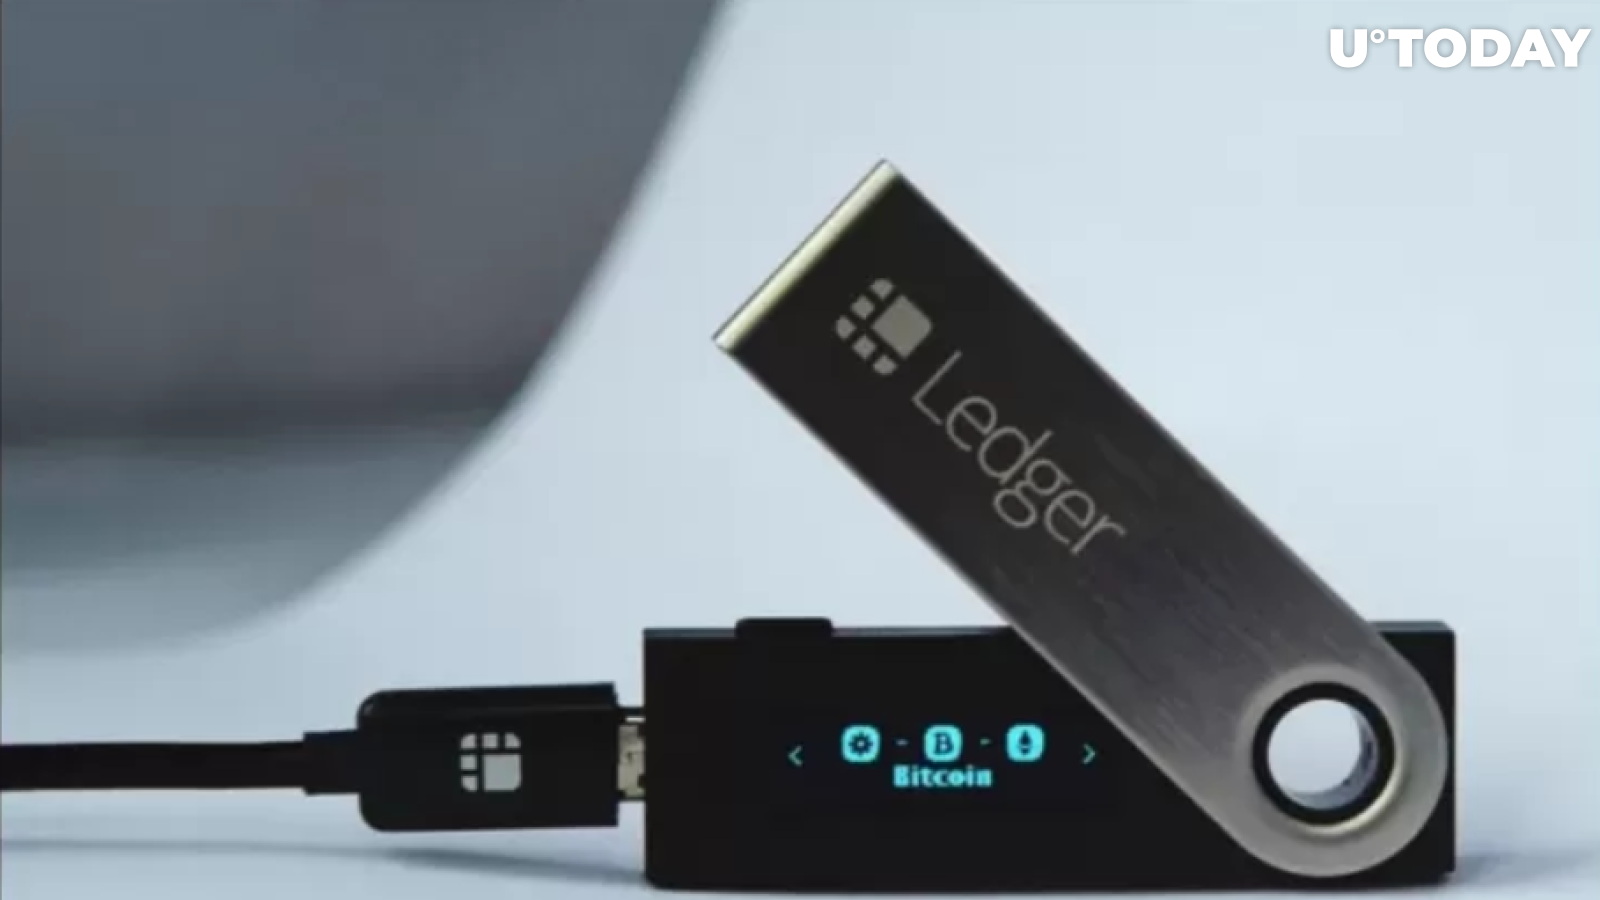 Crypto Wallet Ledger Warns Users About Fake Google Chrome Extension